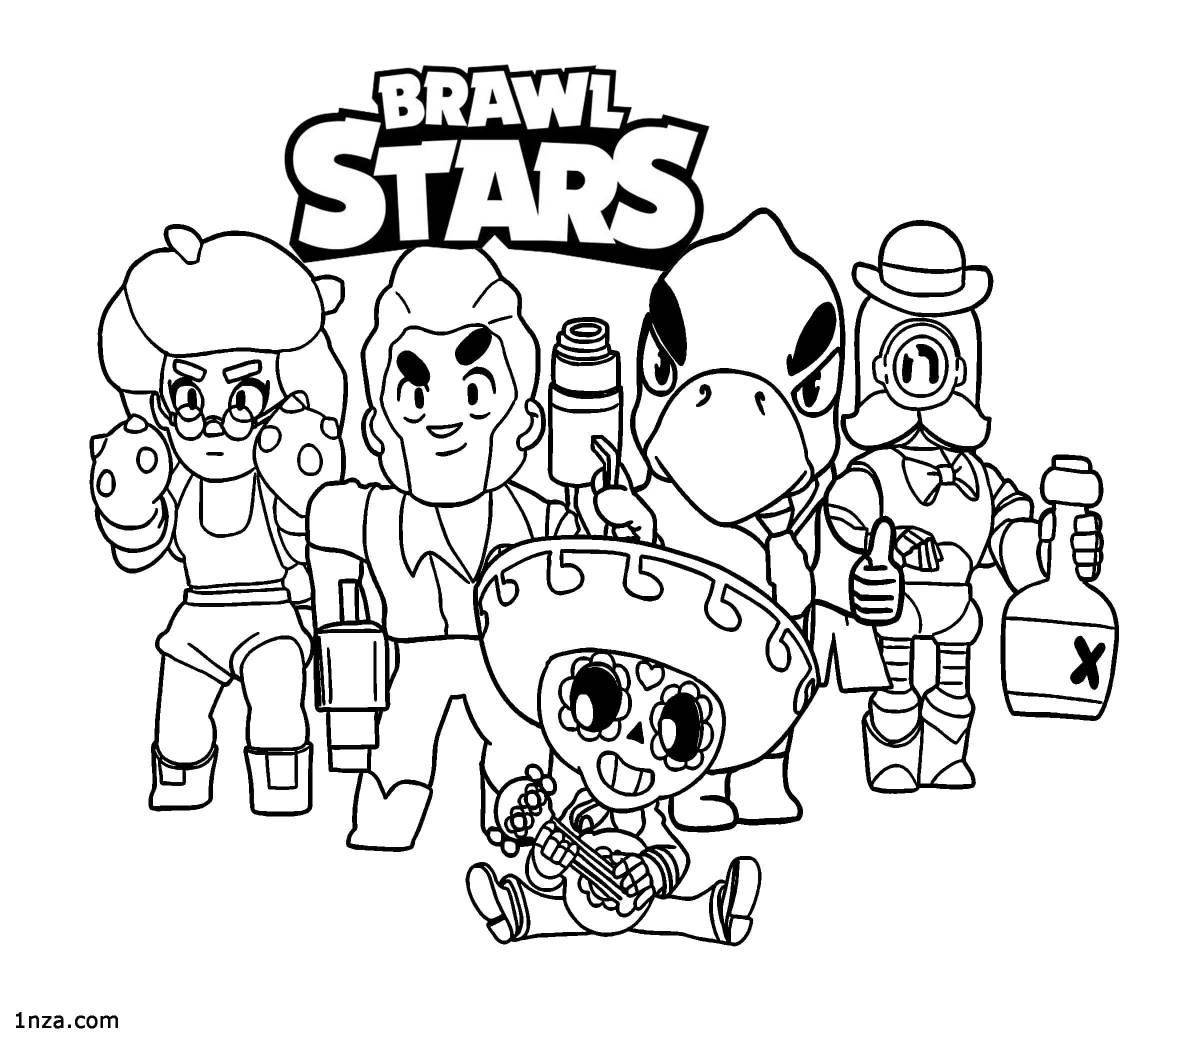 Highly detailed bravo stars chromatic fighters